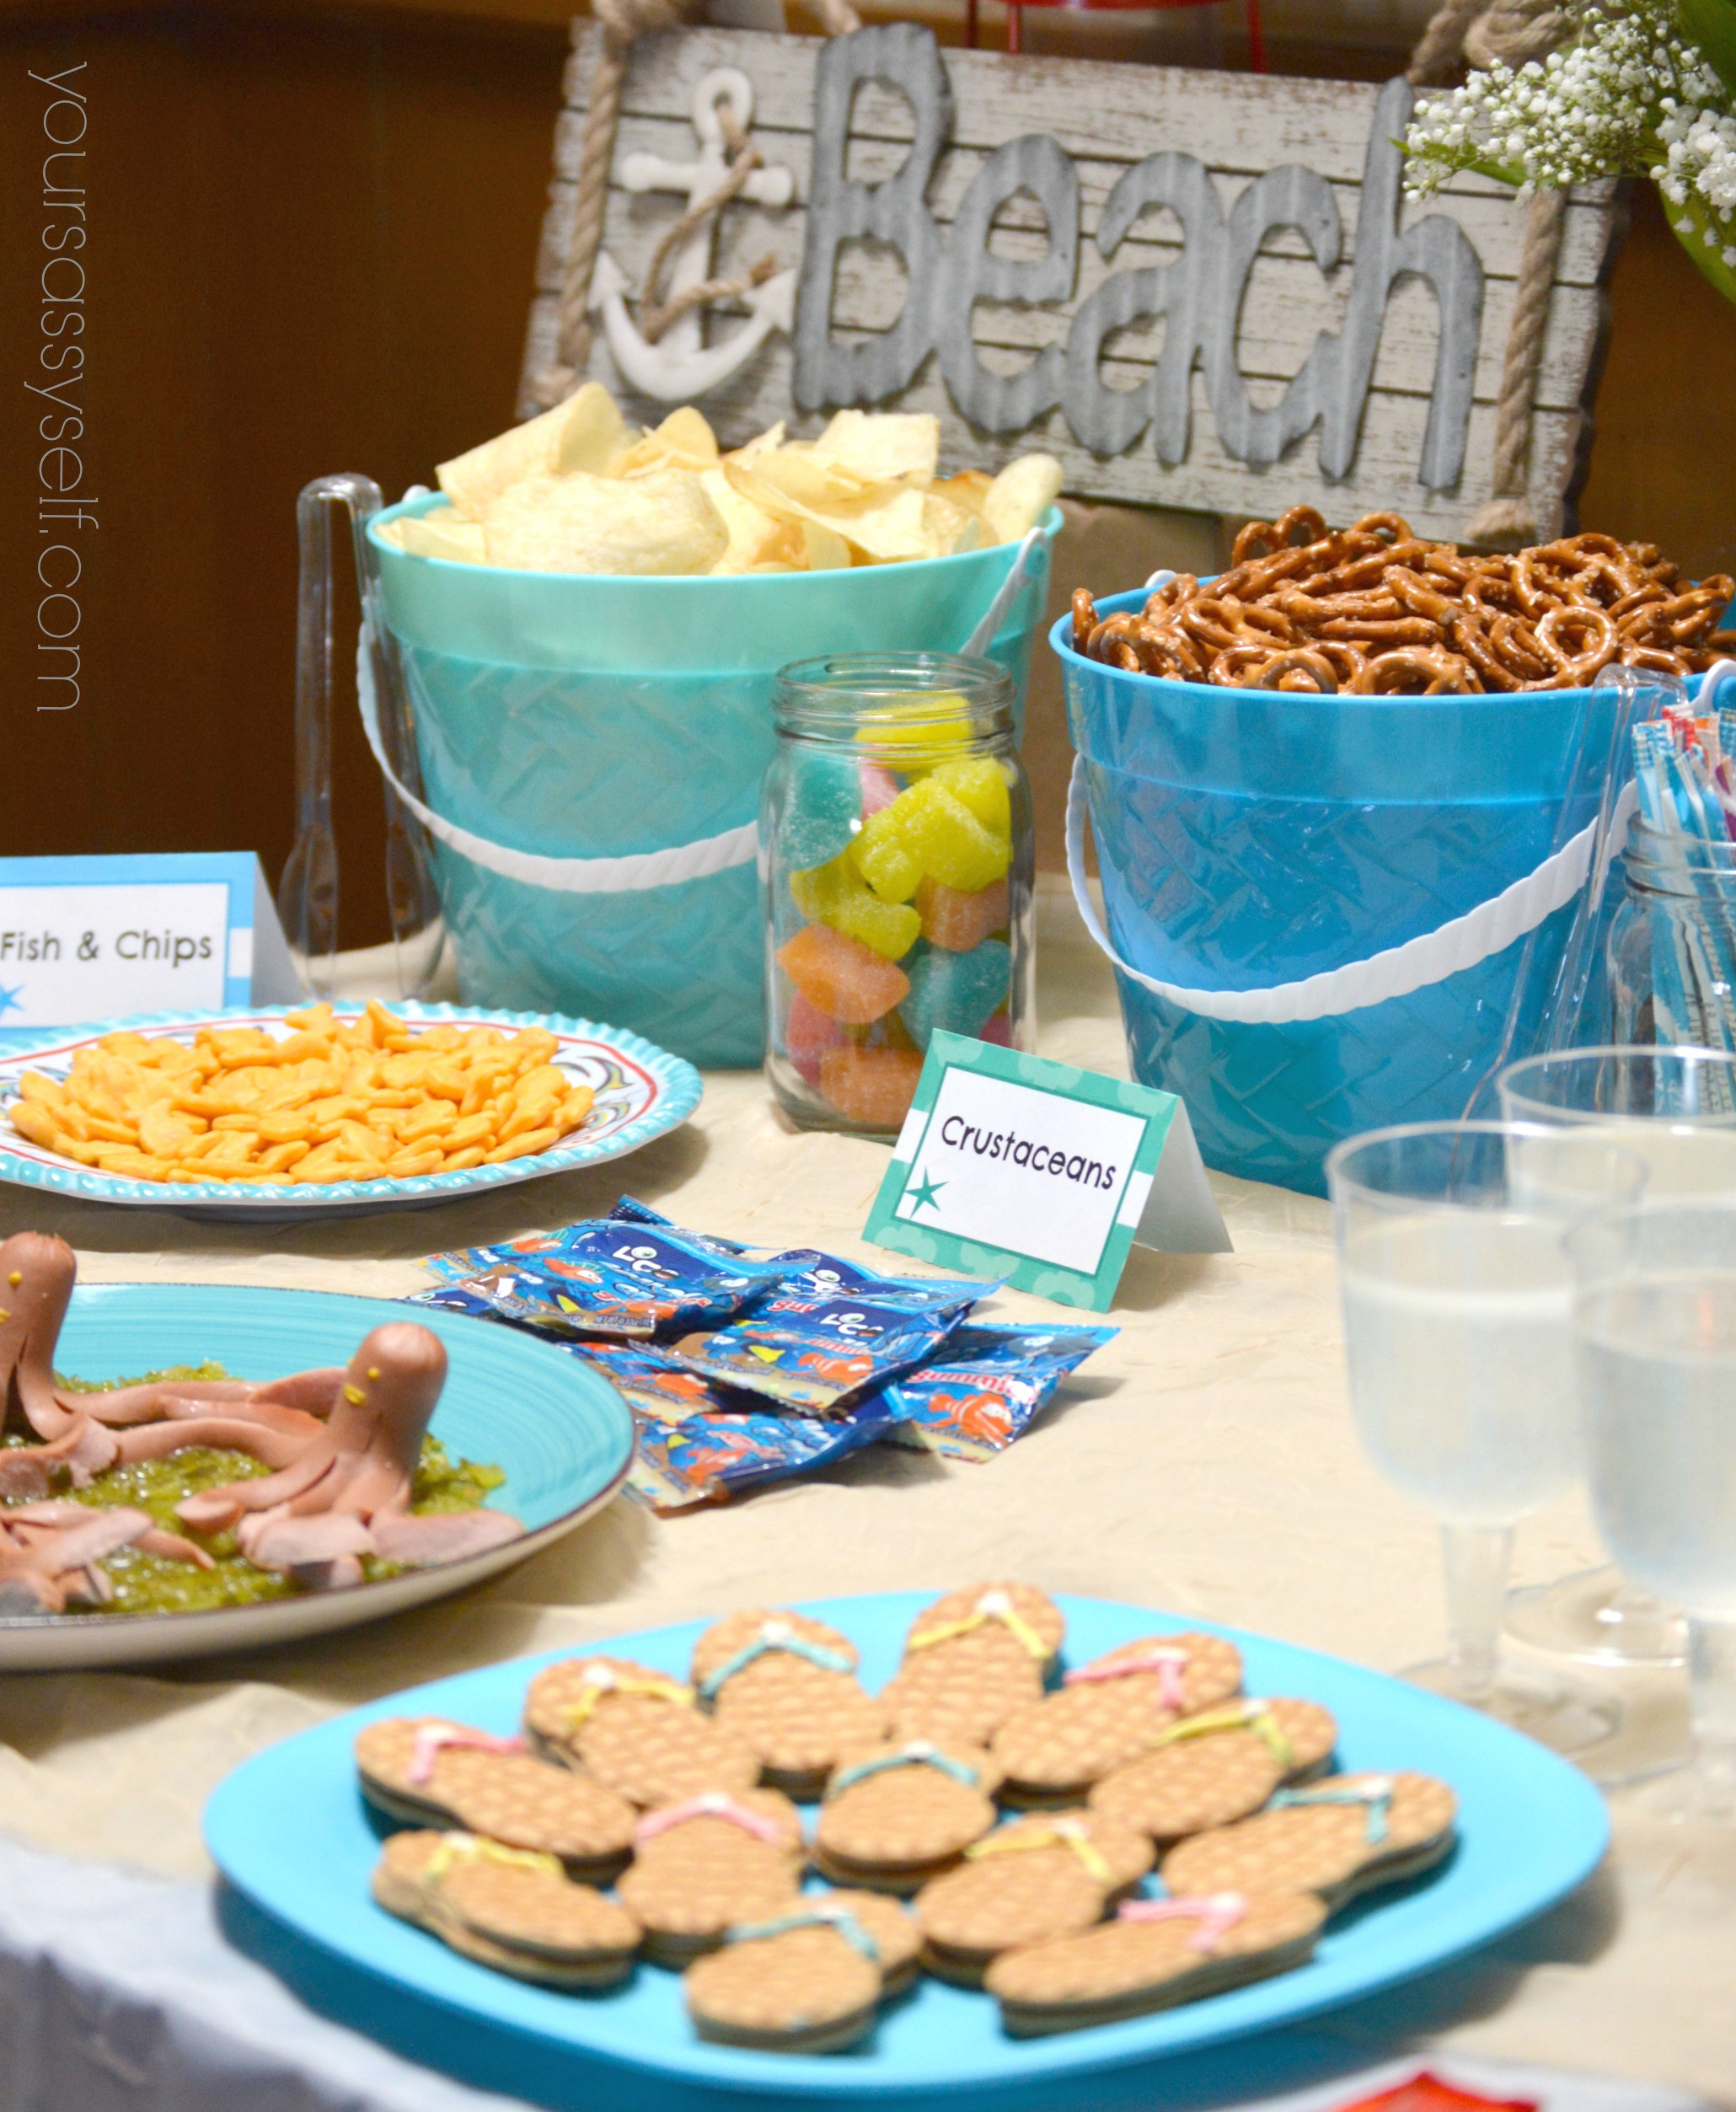 Ideas For A Beach Party
 Fun Birthday Beach Party Ideas For Any Age Your Sassy Self